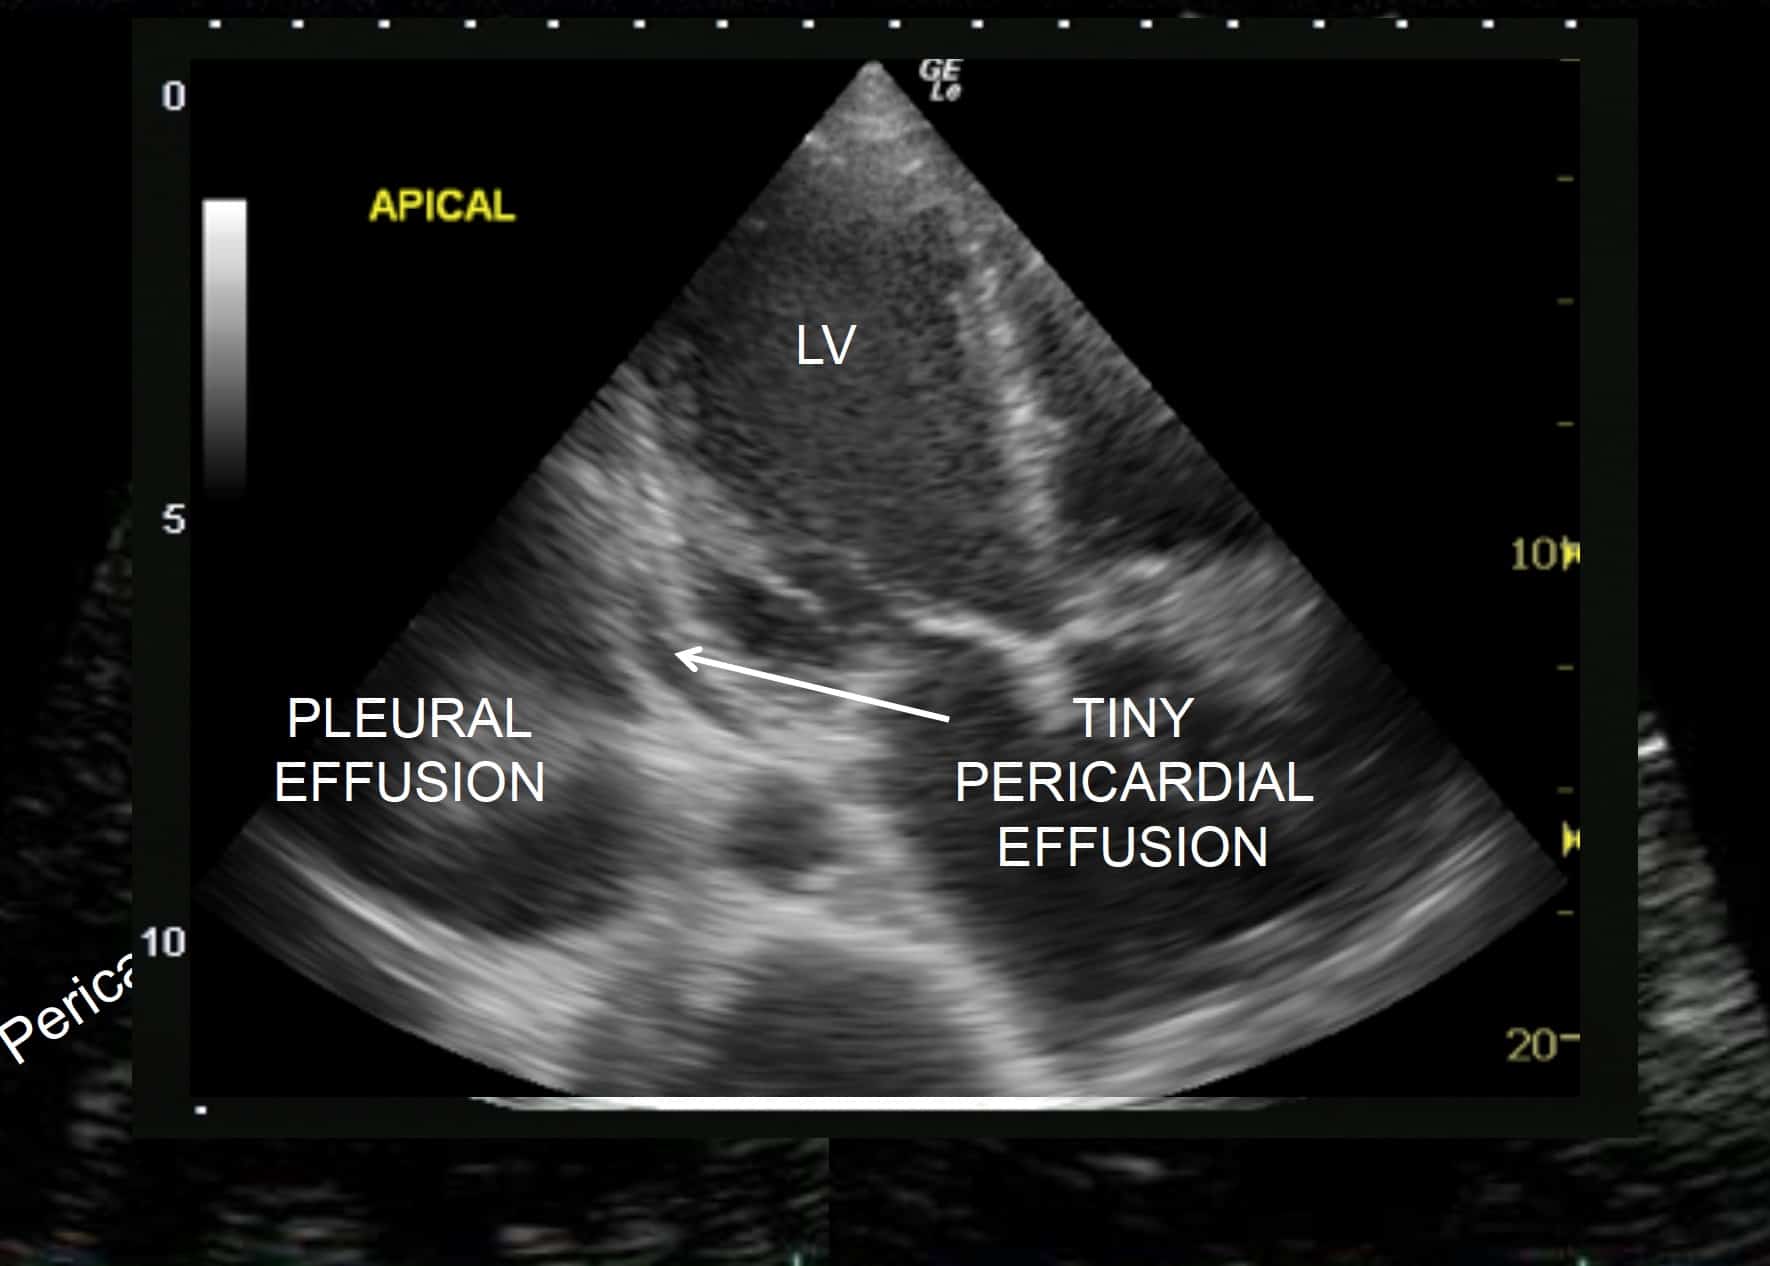 Inverted apical image - tiny pericardial effusion located just in the most dependent part of the pericardial space